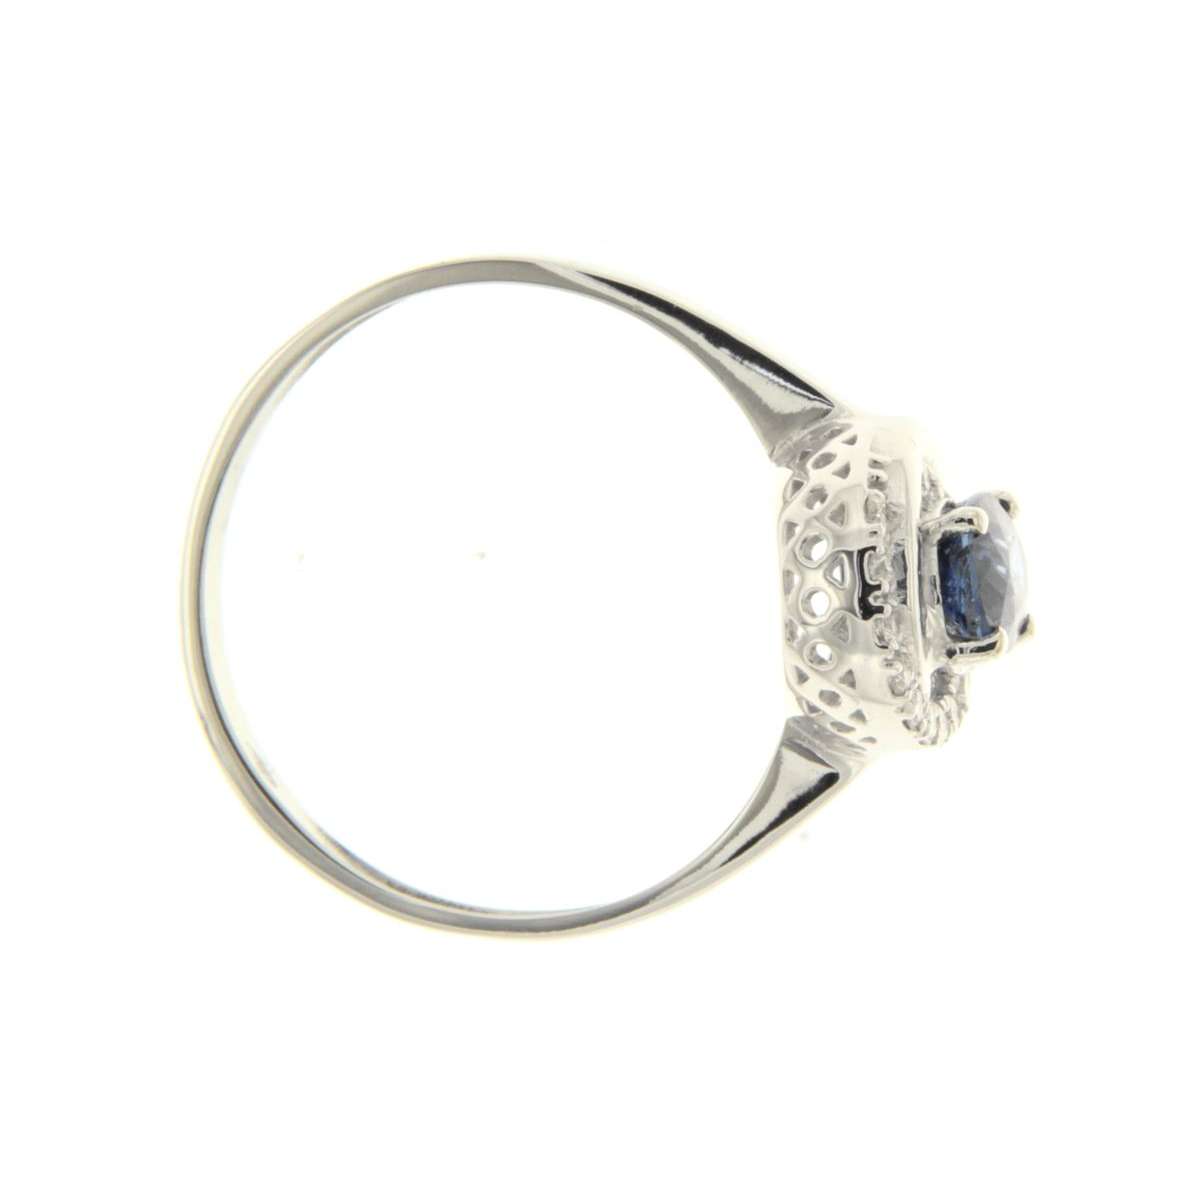 Women's ring in white sapphire blue carats 1.08 and diamonds carats 0.08 g-vs1